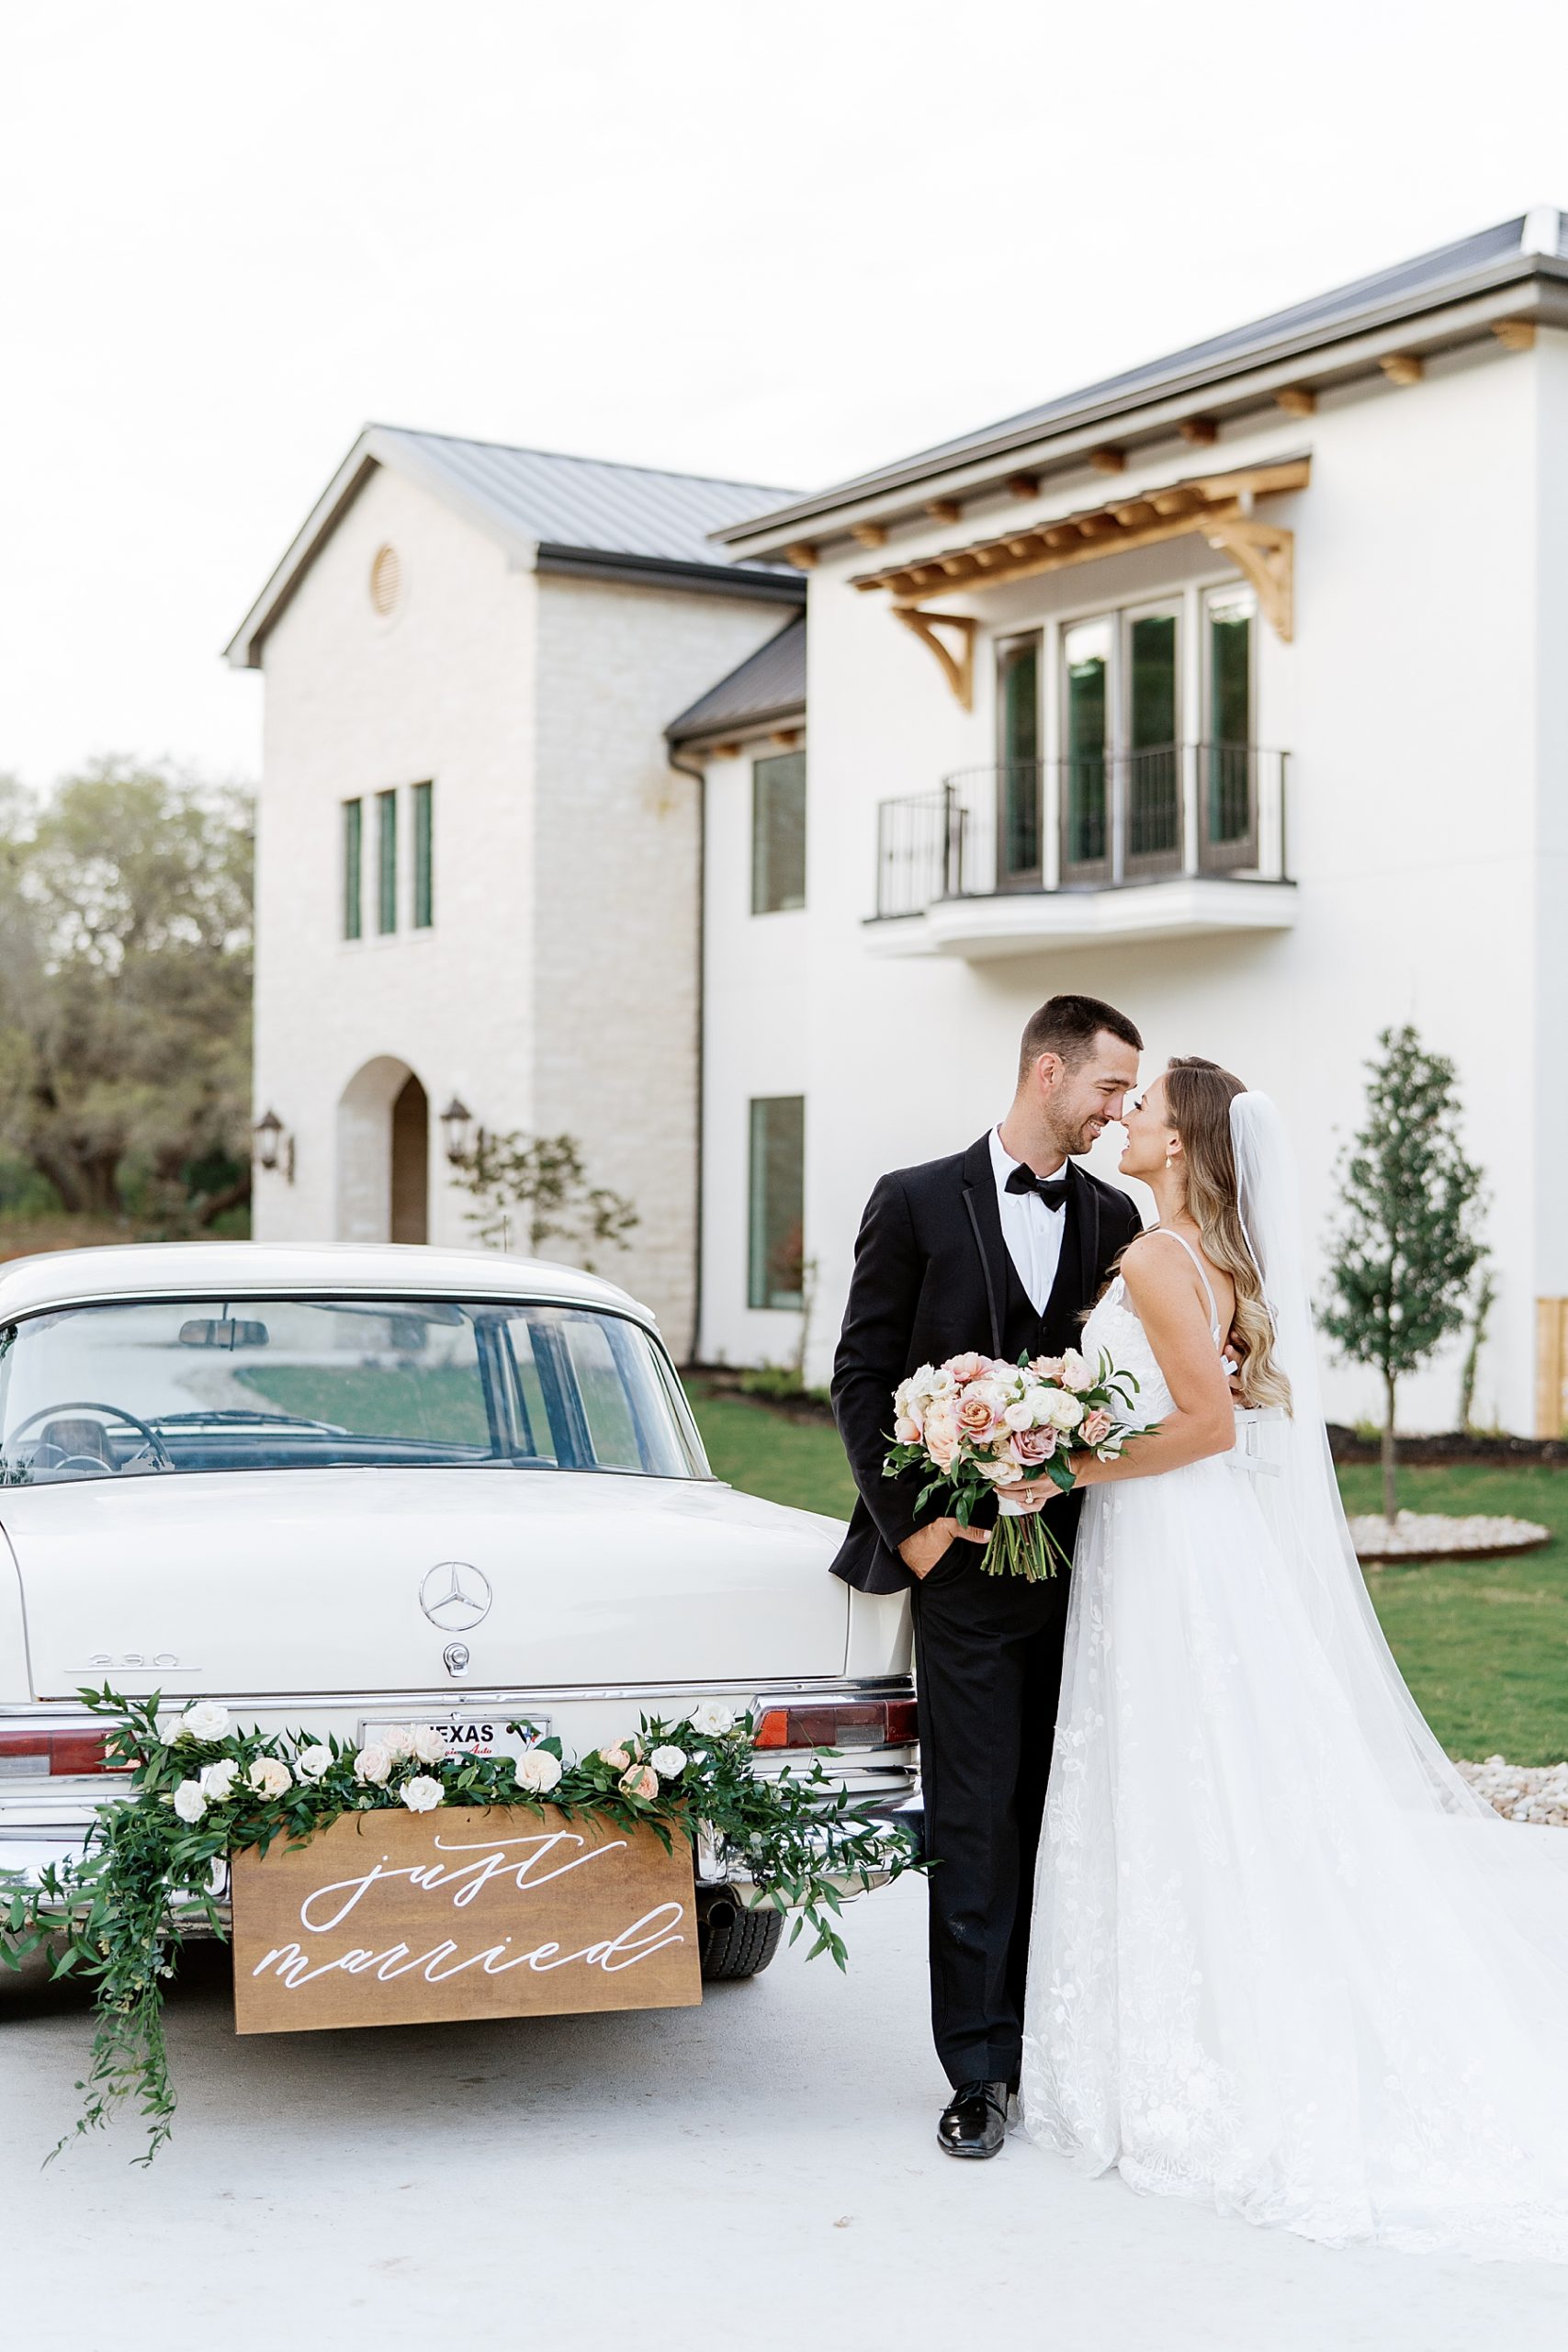 bride and groom smiling at each other next to vintage car on wedding day | Reiley and Rose | Central Texas Wedding Floral Designer | The Preserve at Canyon Lake Wedding Venue | classic wedding inspiration, chic wedding, pink wedding color scheme | via reileyandrose.com